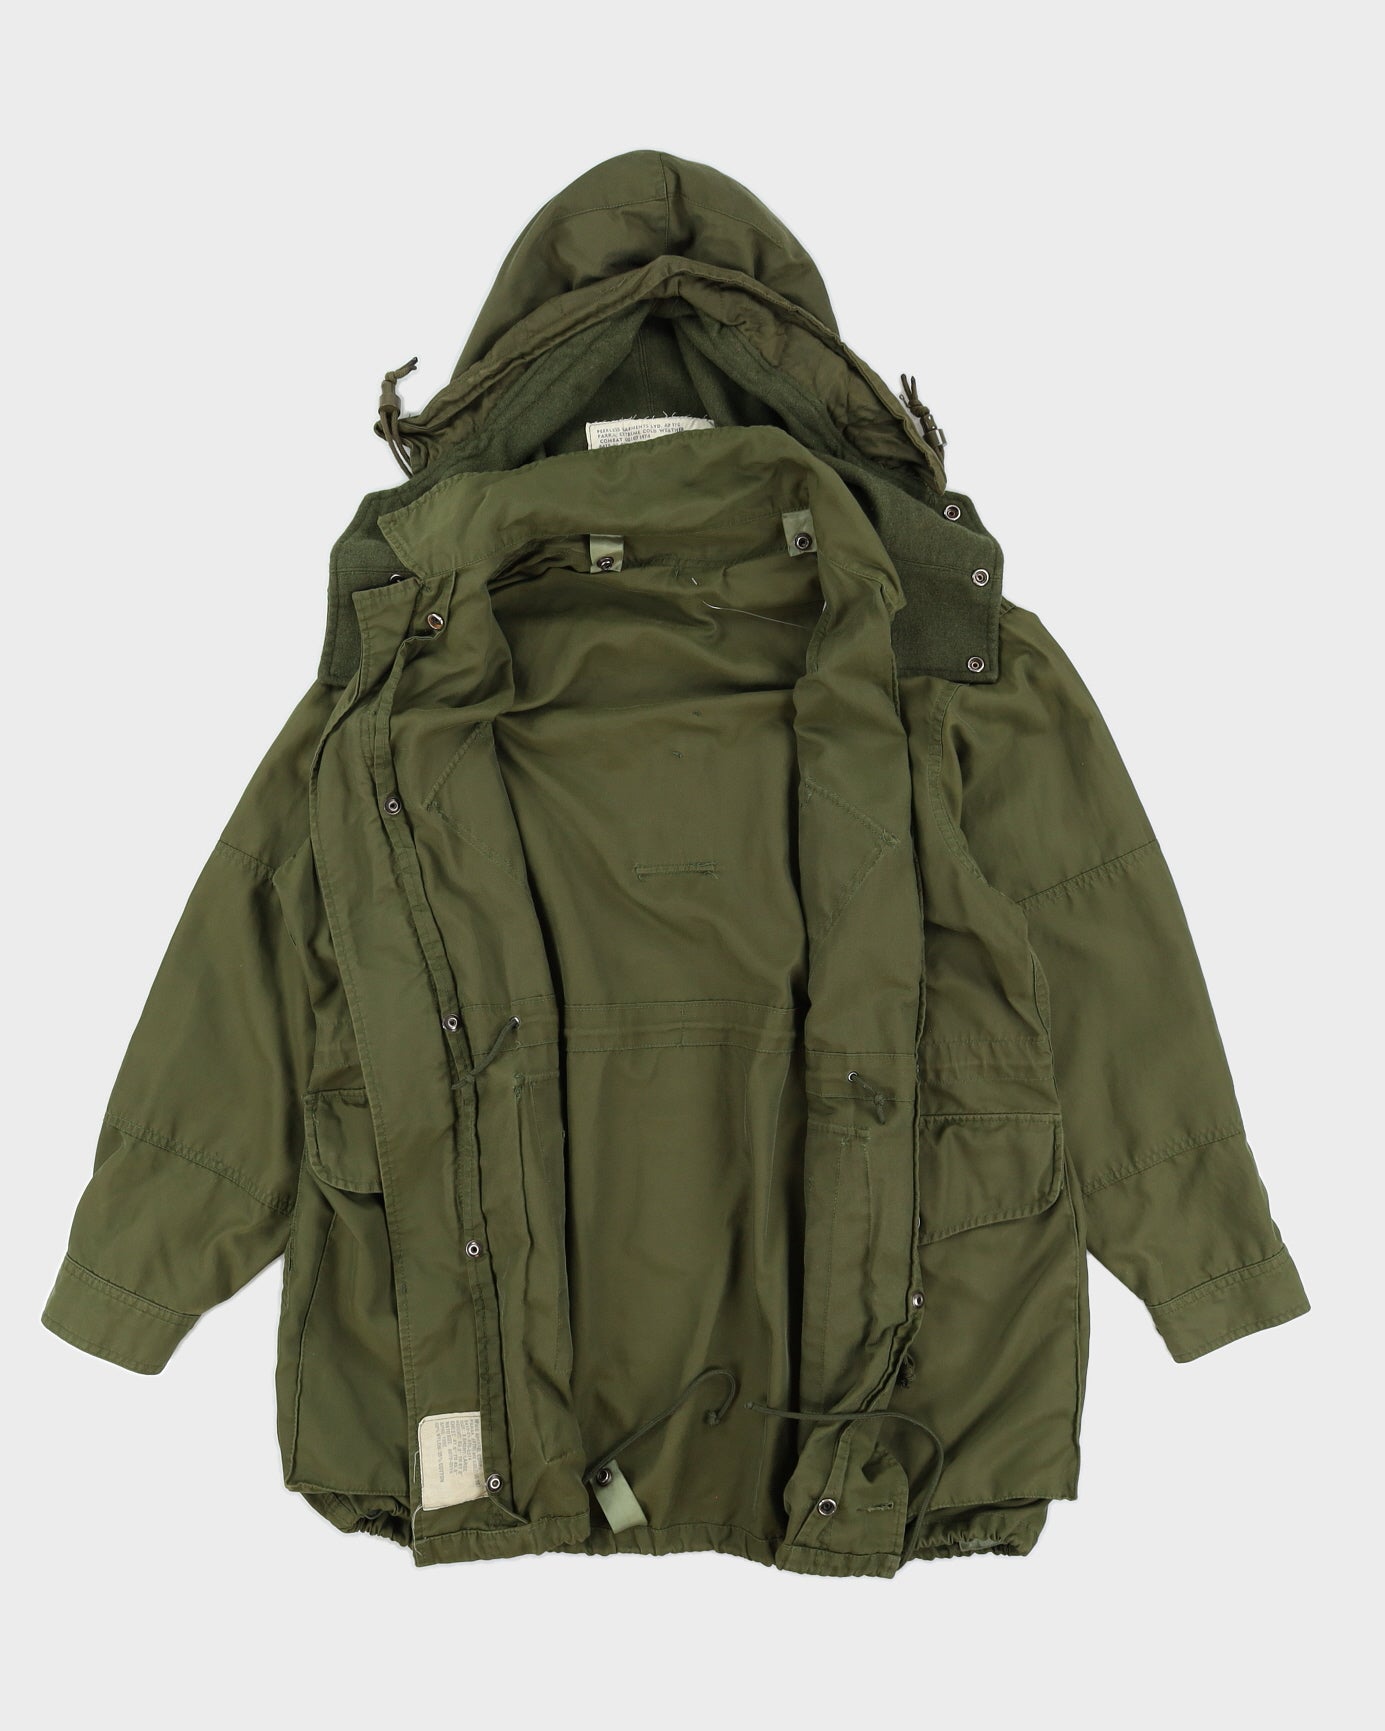 90s Canadian Army Cold Weather Parka - XXL